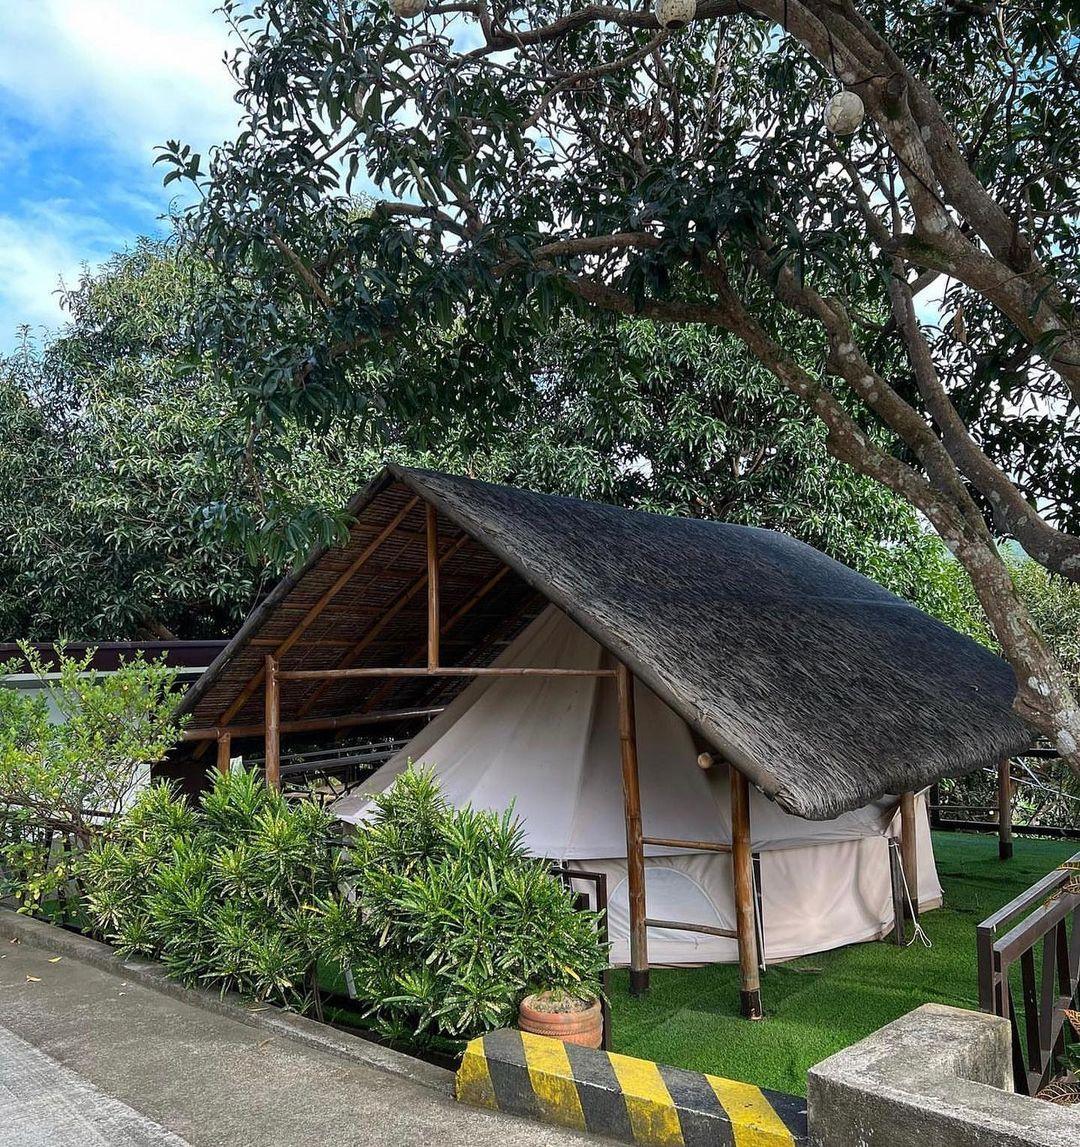 class="content__text"
 In need of an escape? Book our Glamping Tent with your family and friends for a new kind of adventure and experience! 🏕️ 

visit our website nayomisanctuaryresort.com to book! 🍃 
 